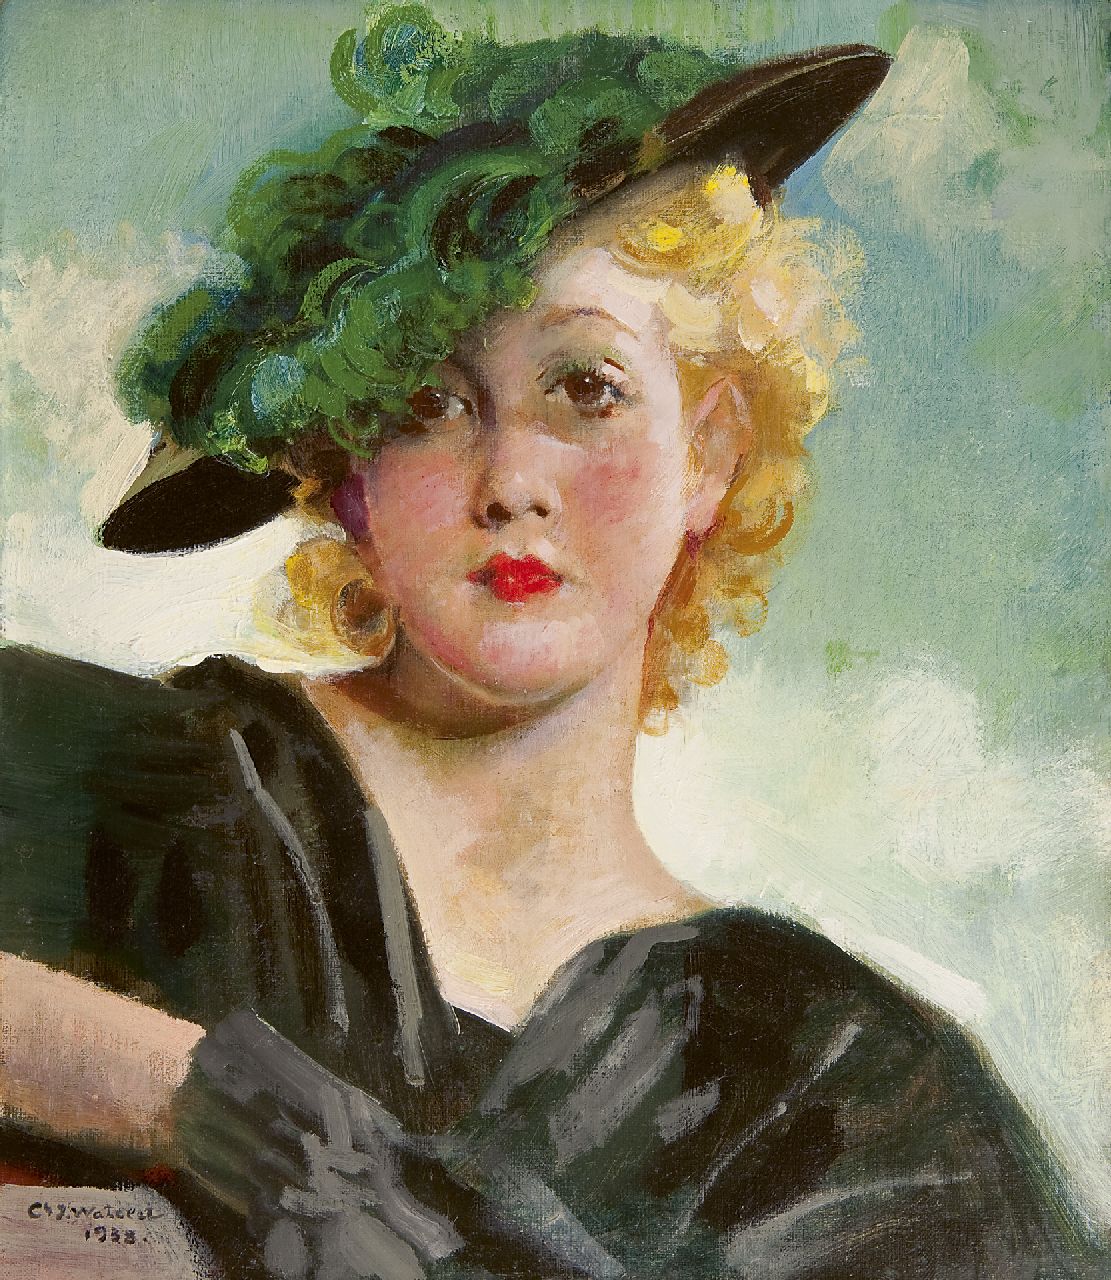 Watelet C.J.  | 'Charles' Joseph Watelet, Lady with green hat, oil on canvas 40.1 x 34.9 cm, signed l.l. and dated 1938